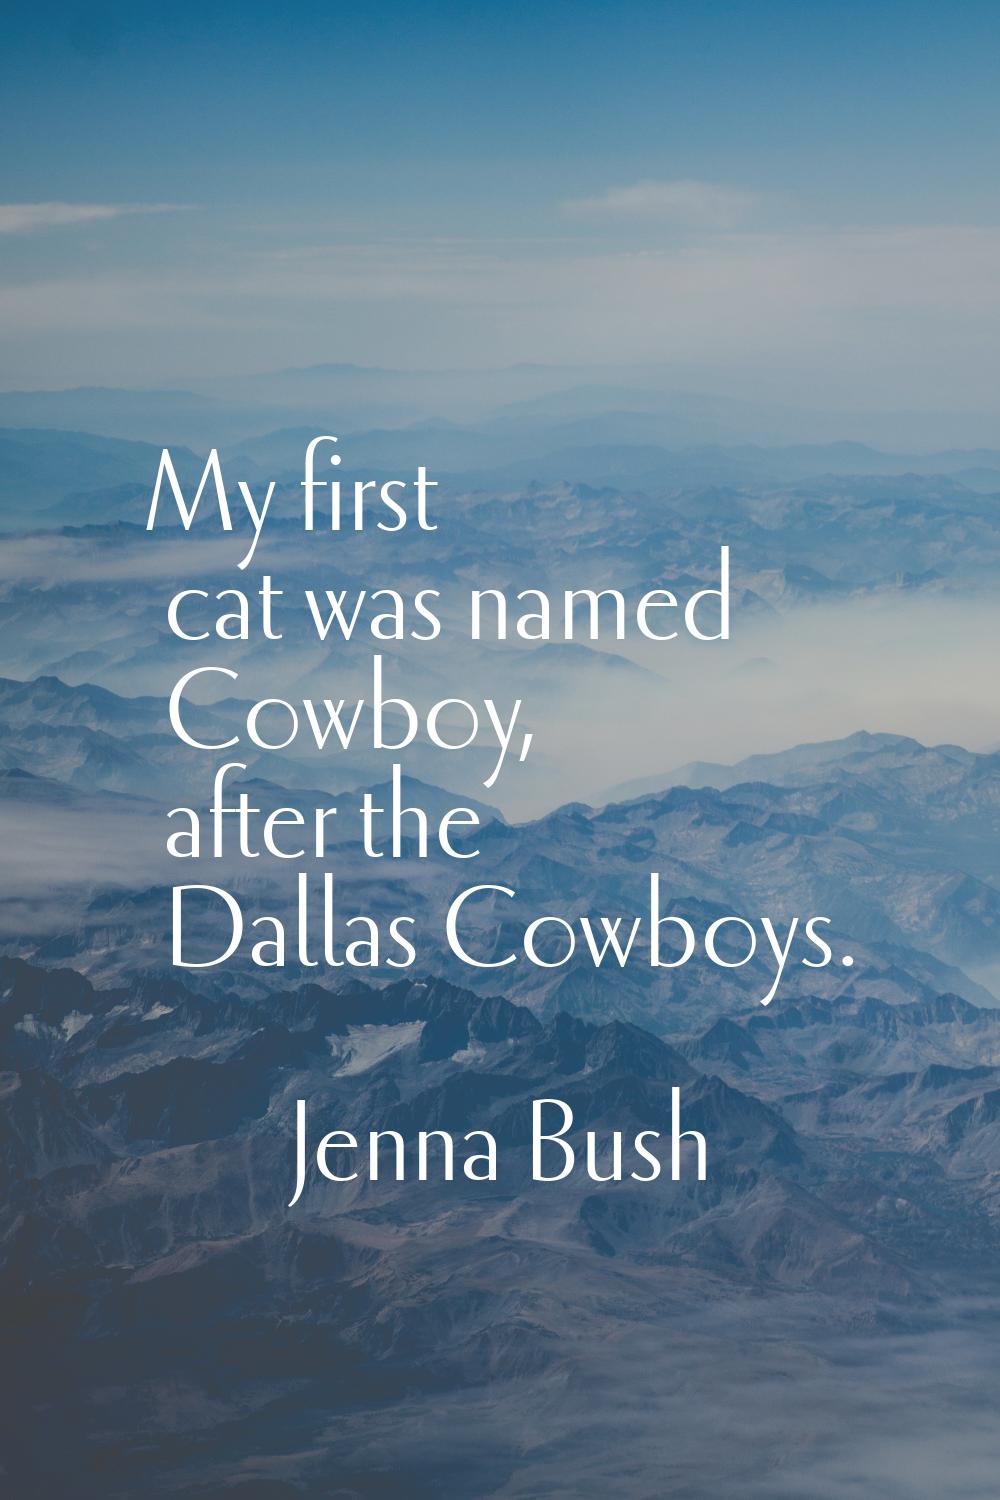 My first cat was named Cowboy, after the Dallas Cowboys.